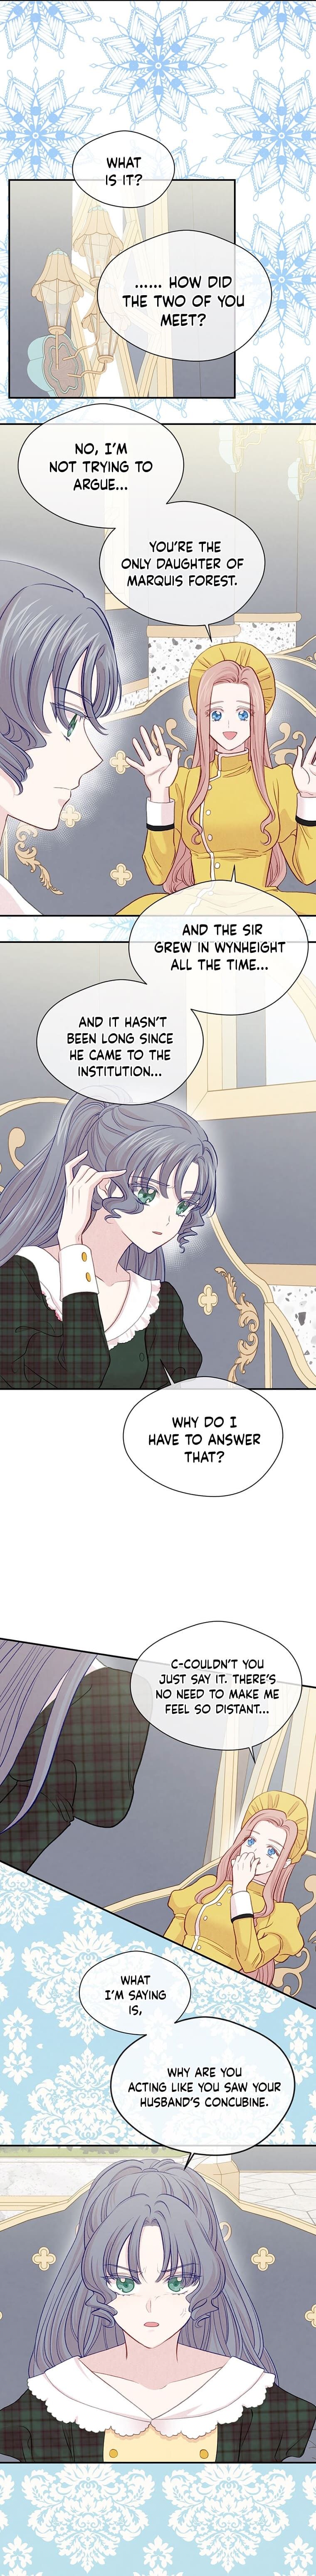 IRIS - Lady with a Smartphone Chapter 126 page 6